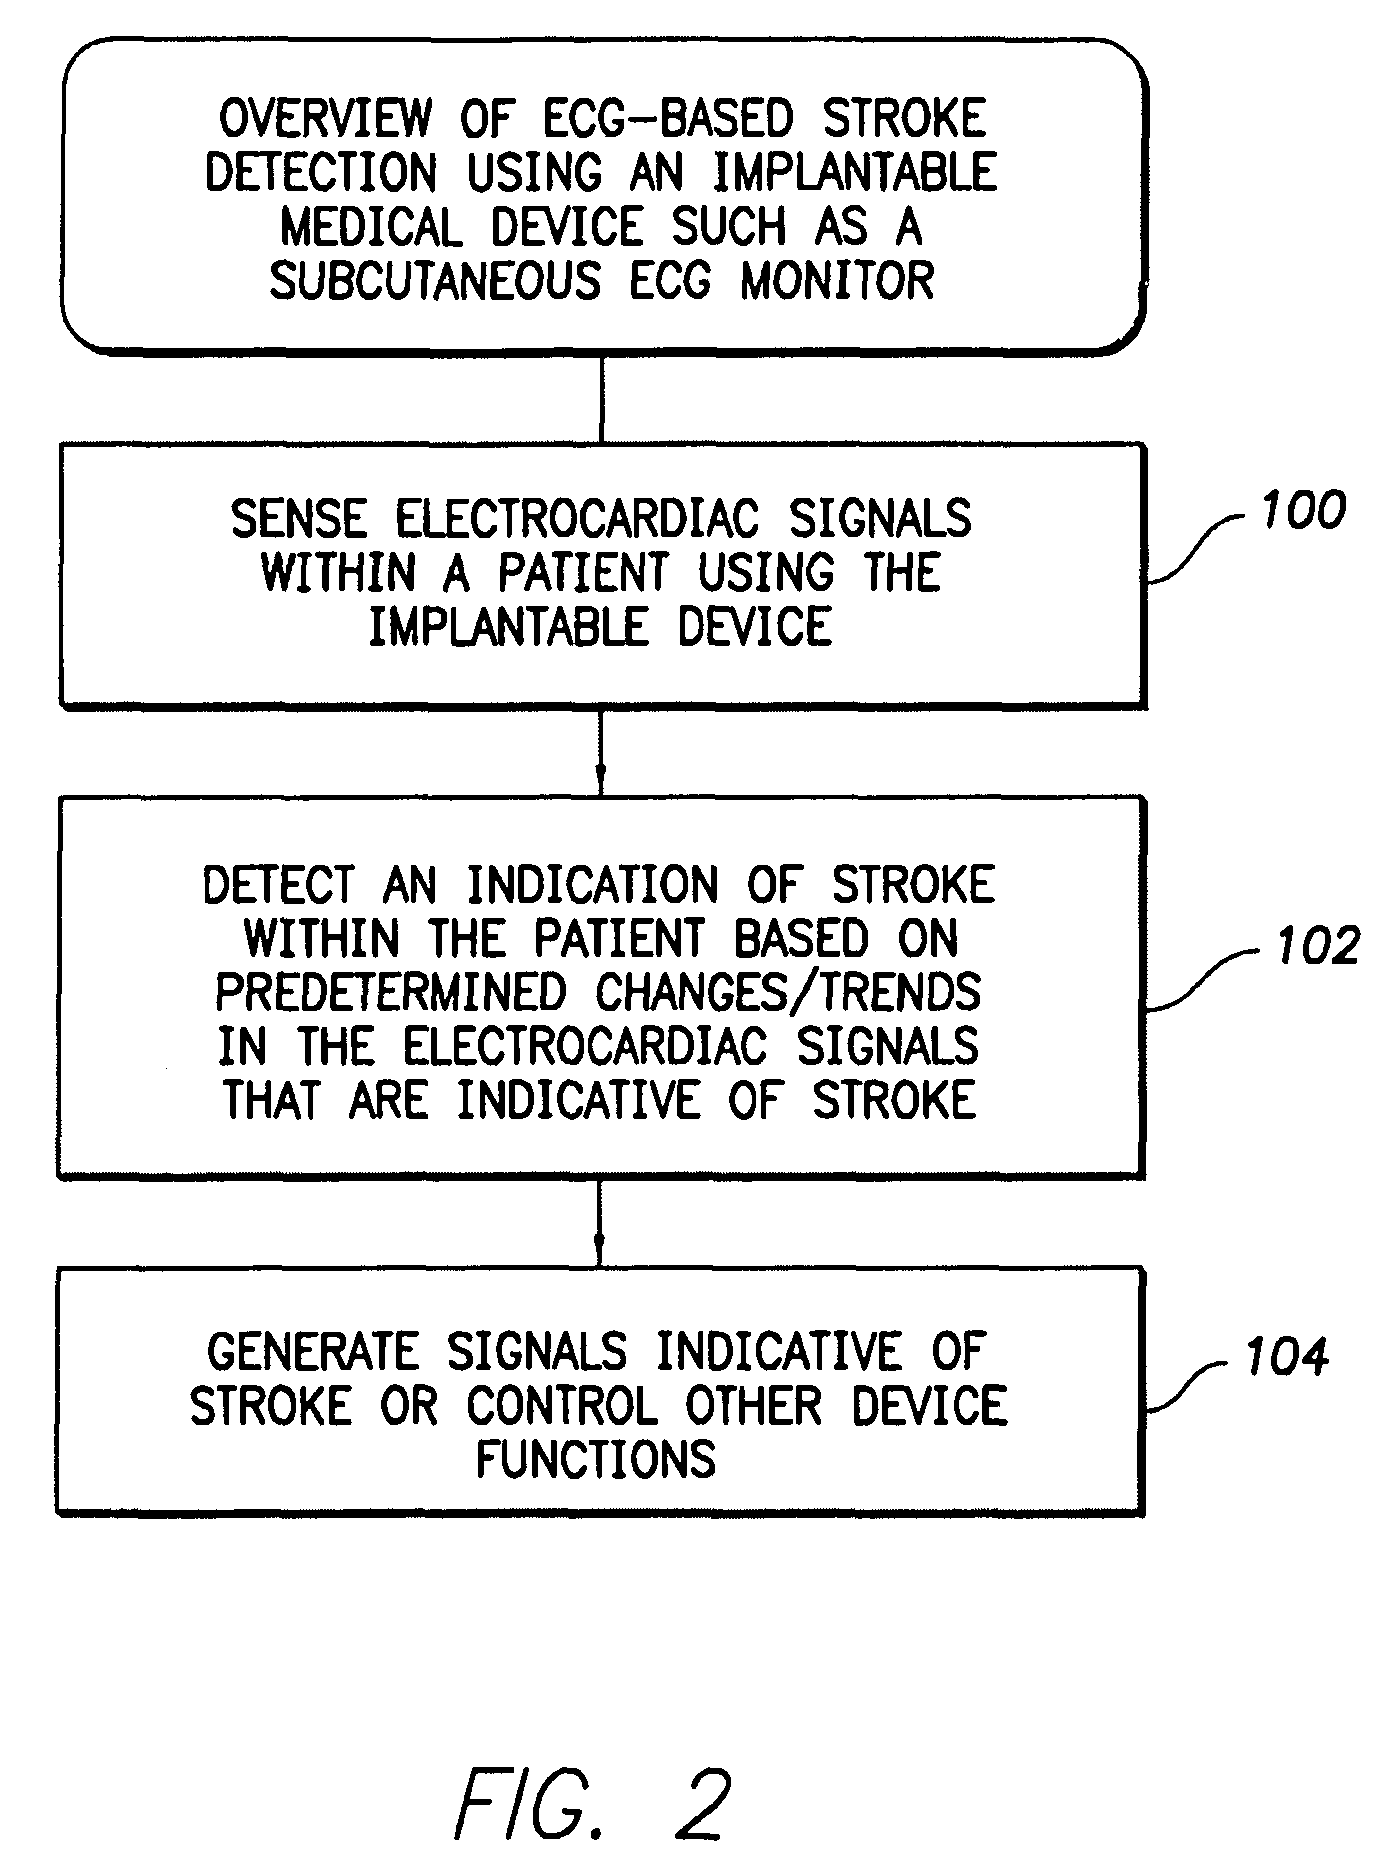 Systems and methods for use with an implantable medical device for detecting stroke based on electrocardiac signals